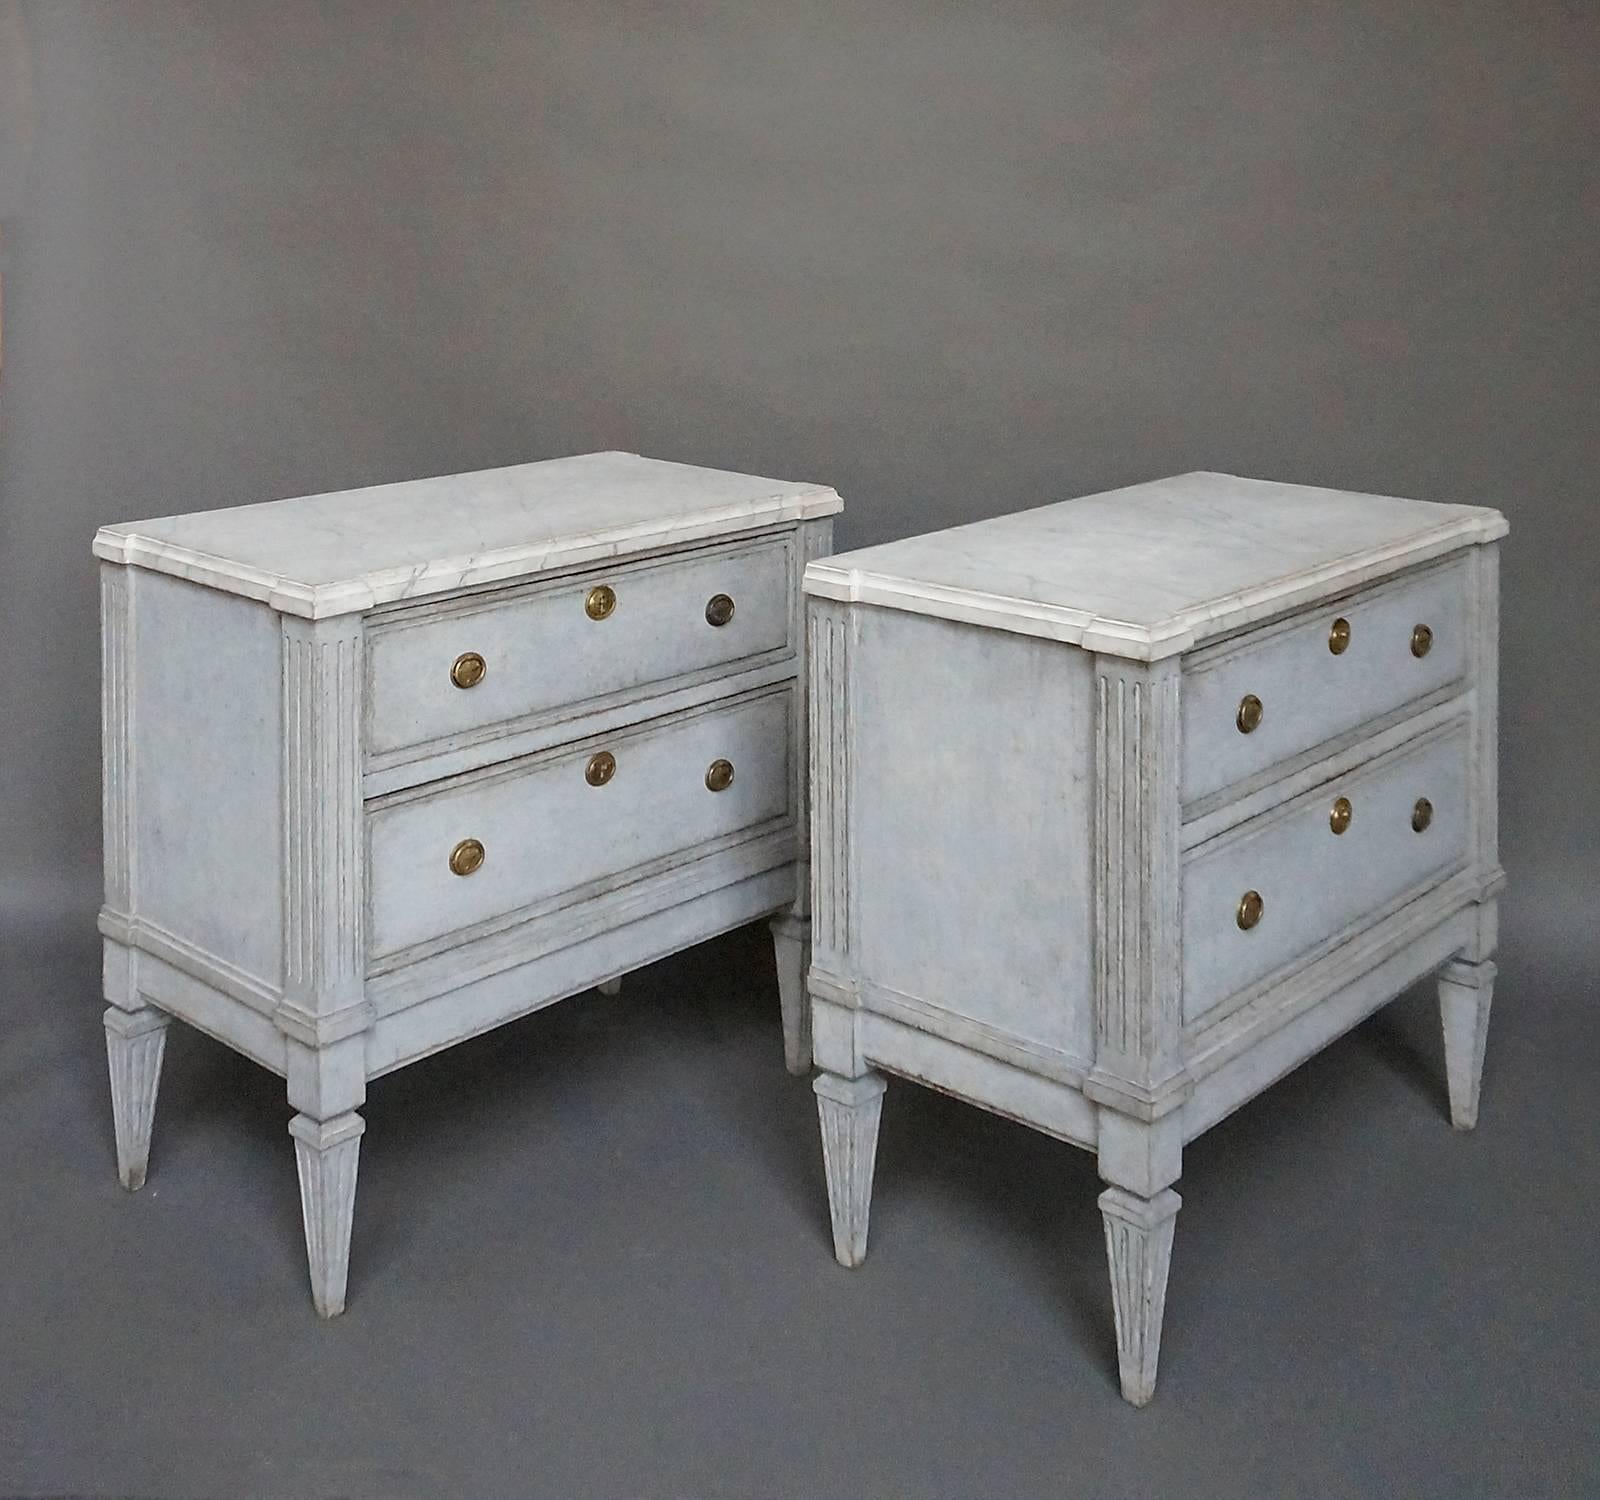 Pair of Swedish neoclassical two drawer commodes, circa 1860, with shaped tops painted with a faux marble design, reeded corner blocks, and tapering square legs. Each dovetailed drawer has raised molding around the edge and brass hardware.